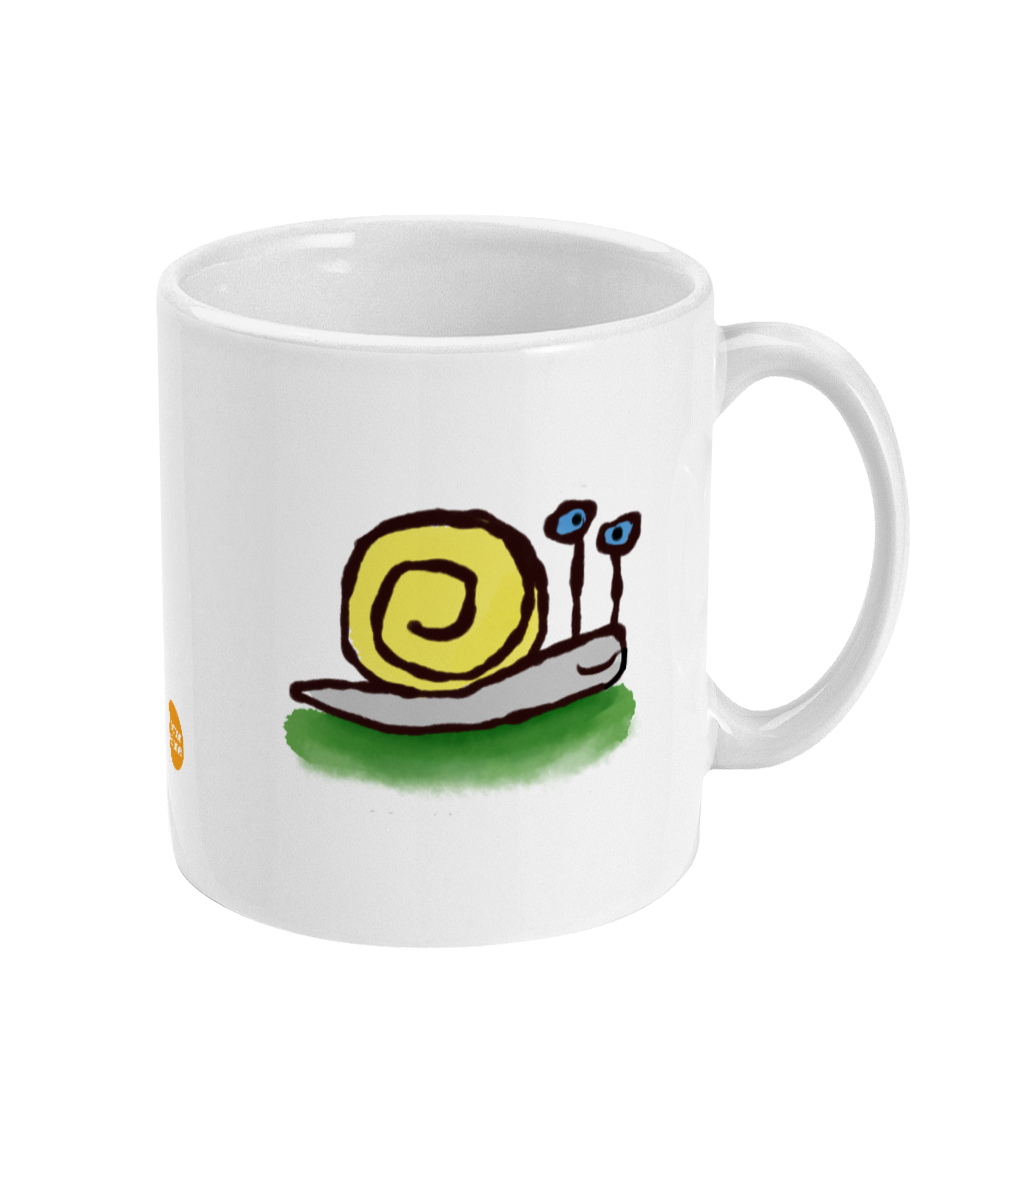 Sly the Snail Mug - Funny Snail illustrated coffee mug by Hector and Bone Right View